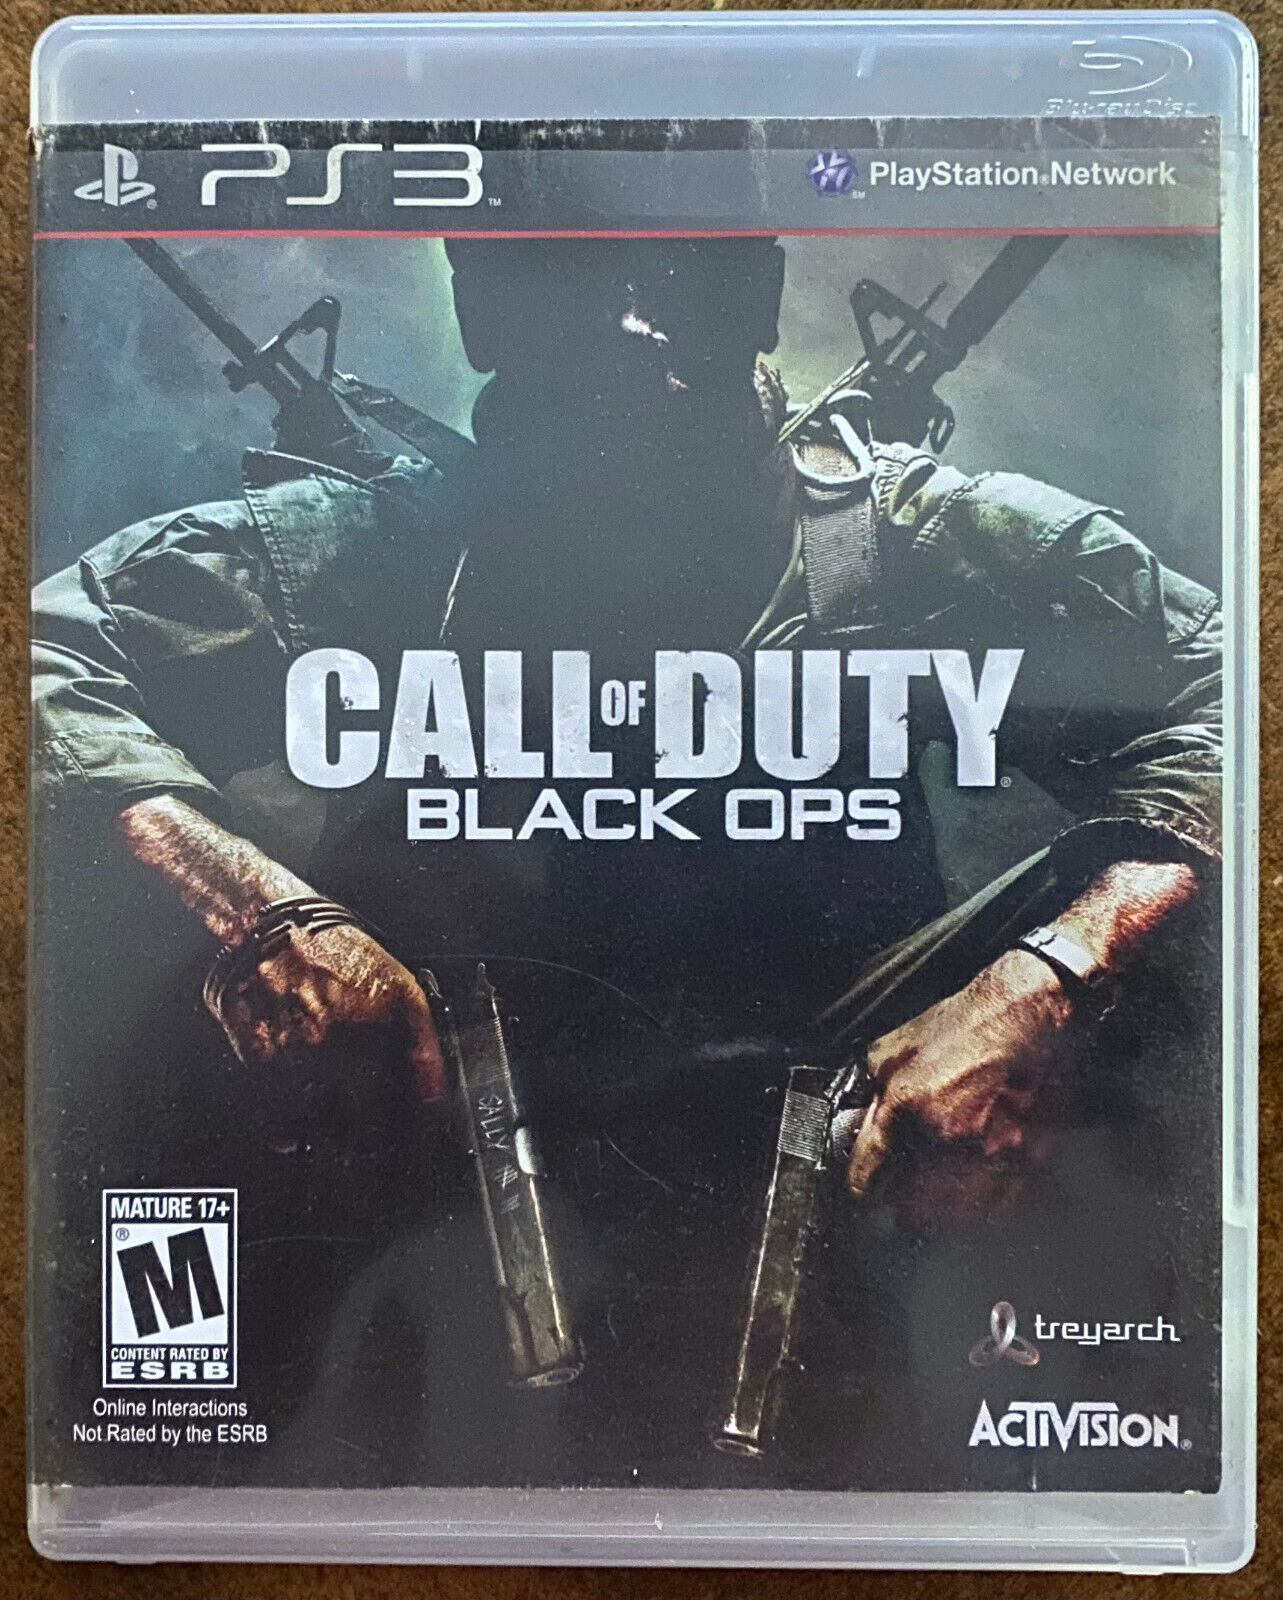 pastel ontploffing Beweren Call of Duty: Black Ops Playstation 3 PS3 Game (Cleaned & Sanitized)  45496742096 | eBay